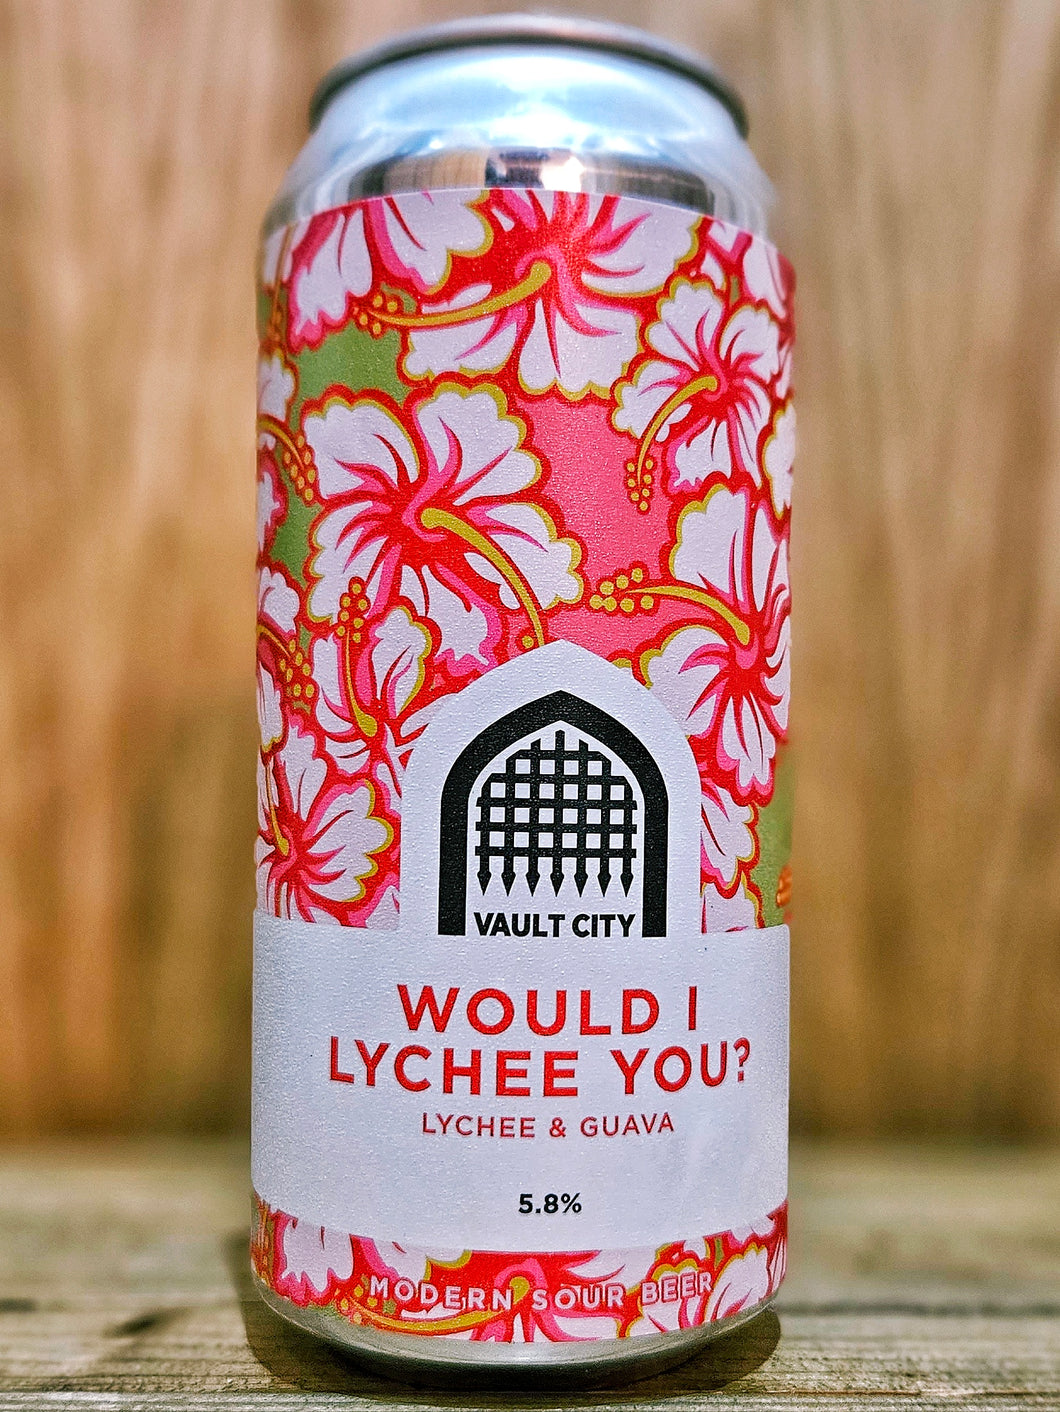 Vault City - Would I Lychee You?